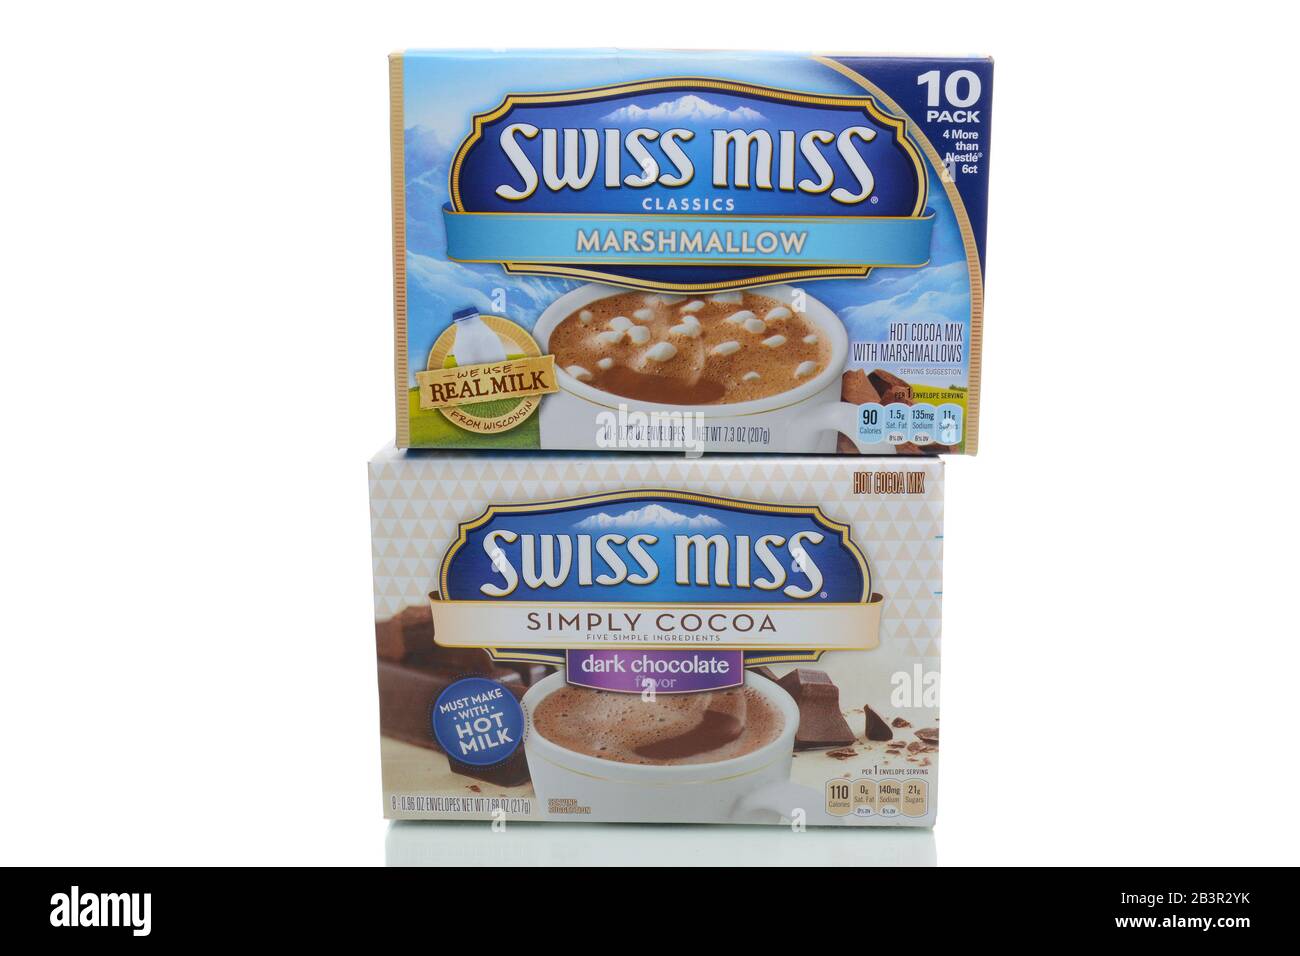 IRVINE, CA - JANUARY 4, 2018: Swiss Miss Hot Cocoa Mix. Swiss Miss is made with fresh milk from local farms, blended with premium imported cocoa. Stock Photo